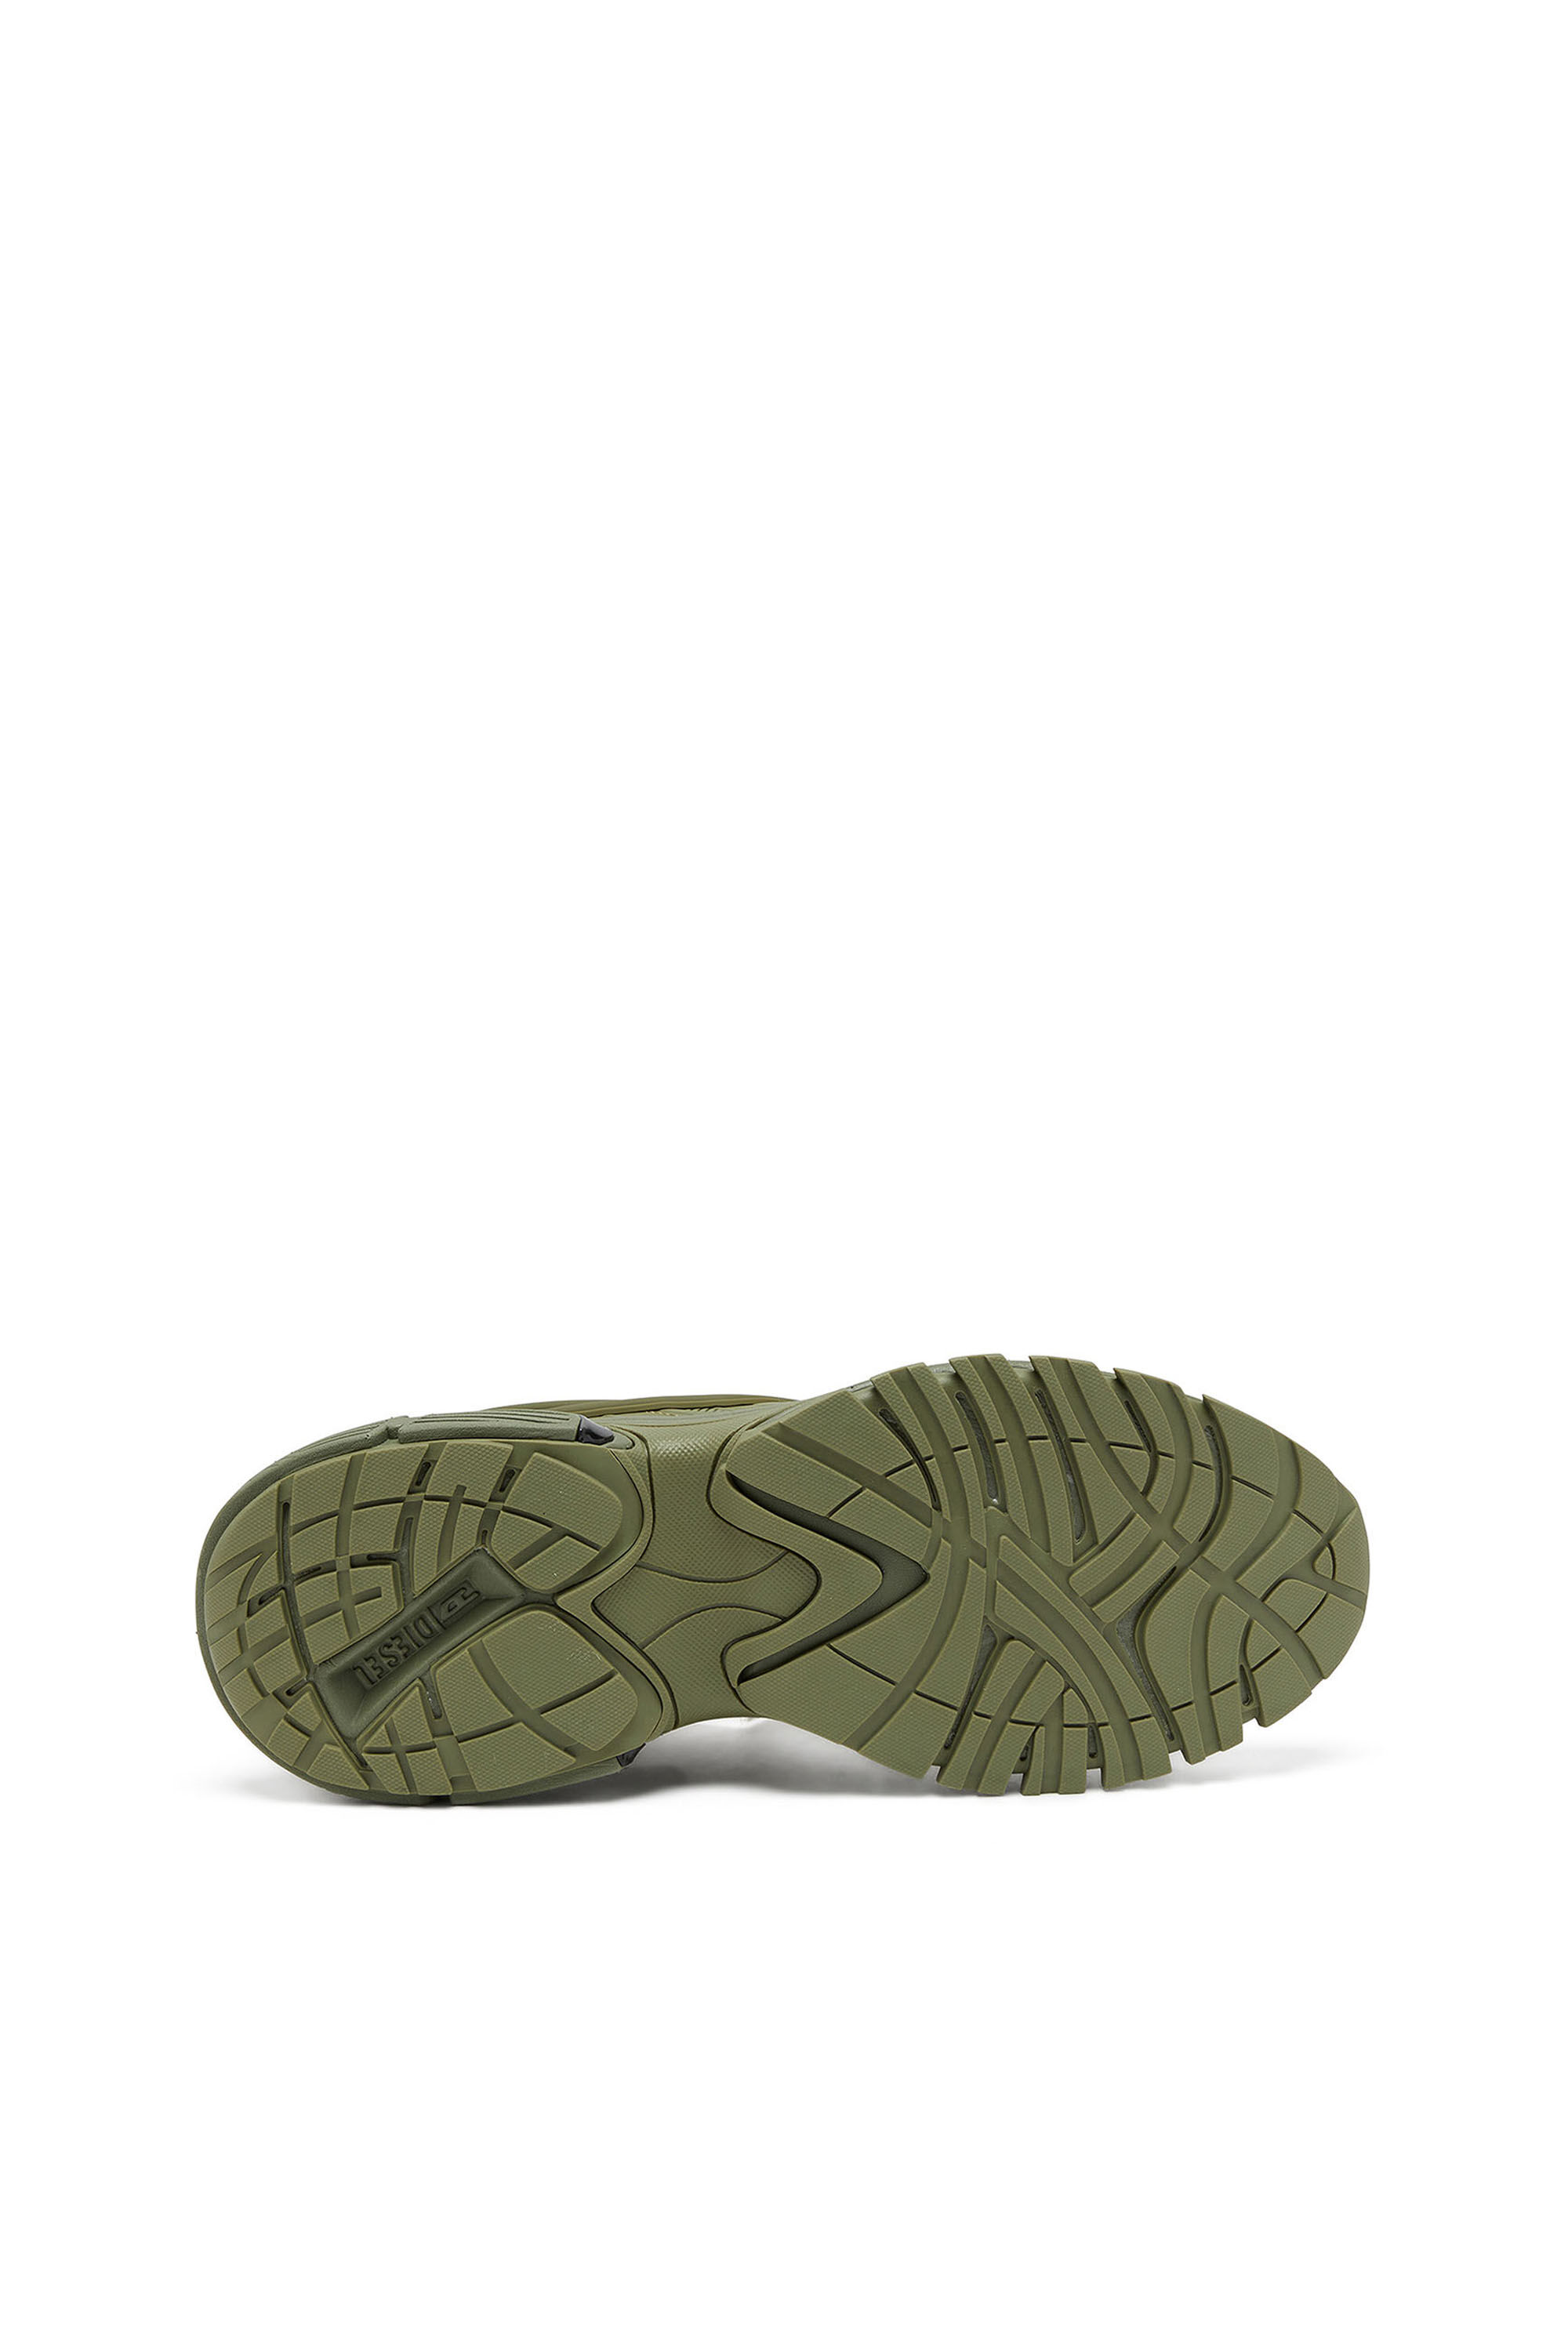 Diesel - S-SERENDIPITY PRO-X1, Man S-Serendipity-Monochrome sneakers in mesh and PU in Green - Image 5